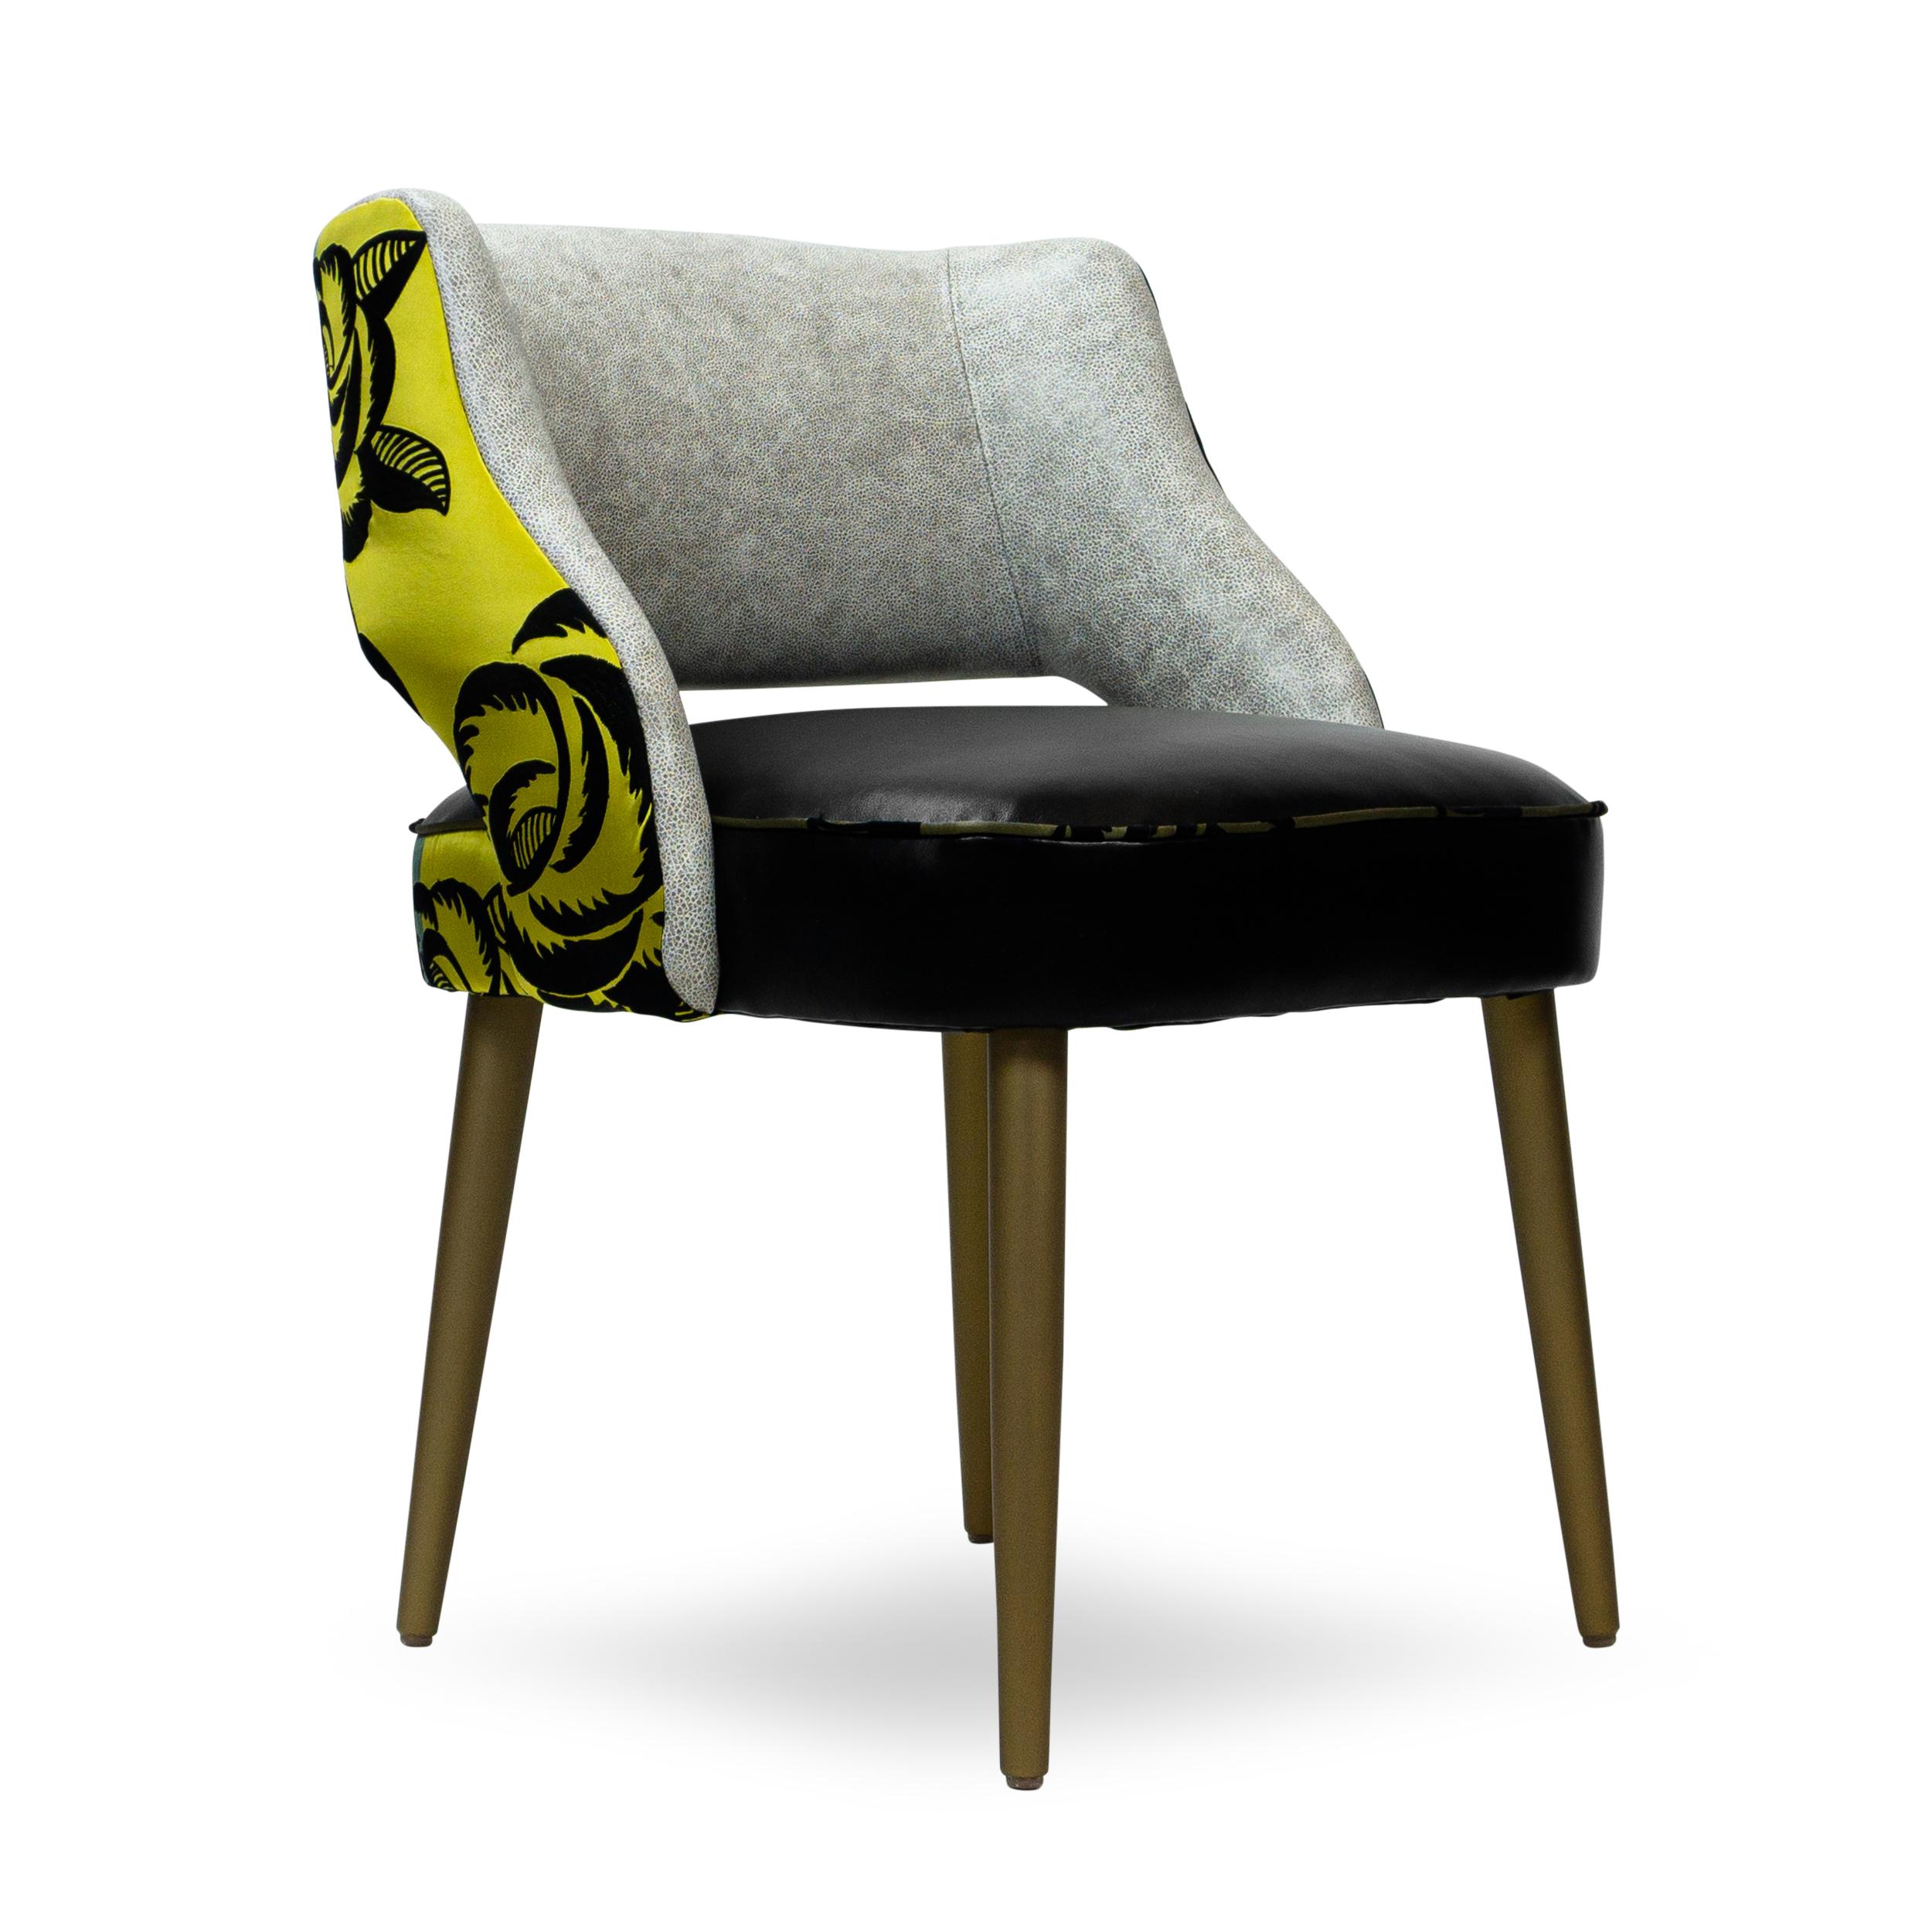 Modern Armless Dining Chair w Faux Leather Inside and Large Scale Floral Jacquard Back For Sale